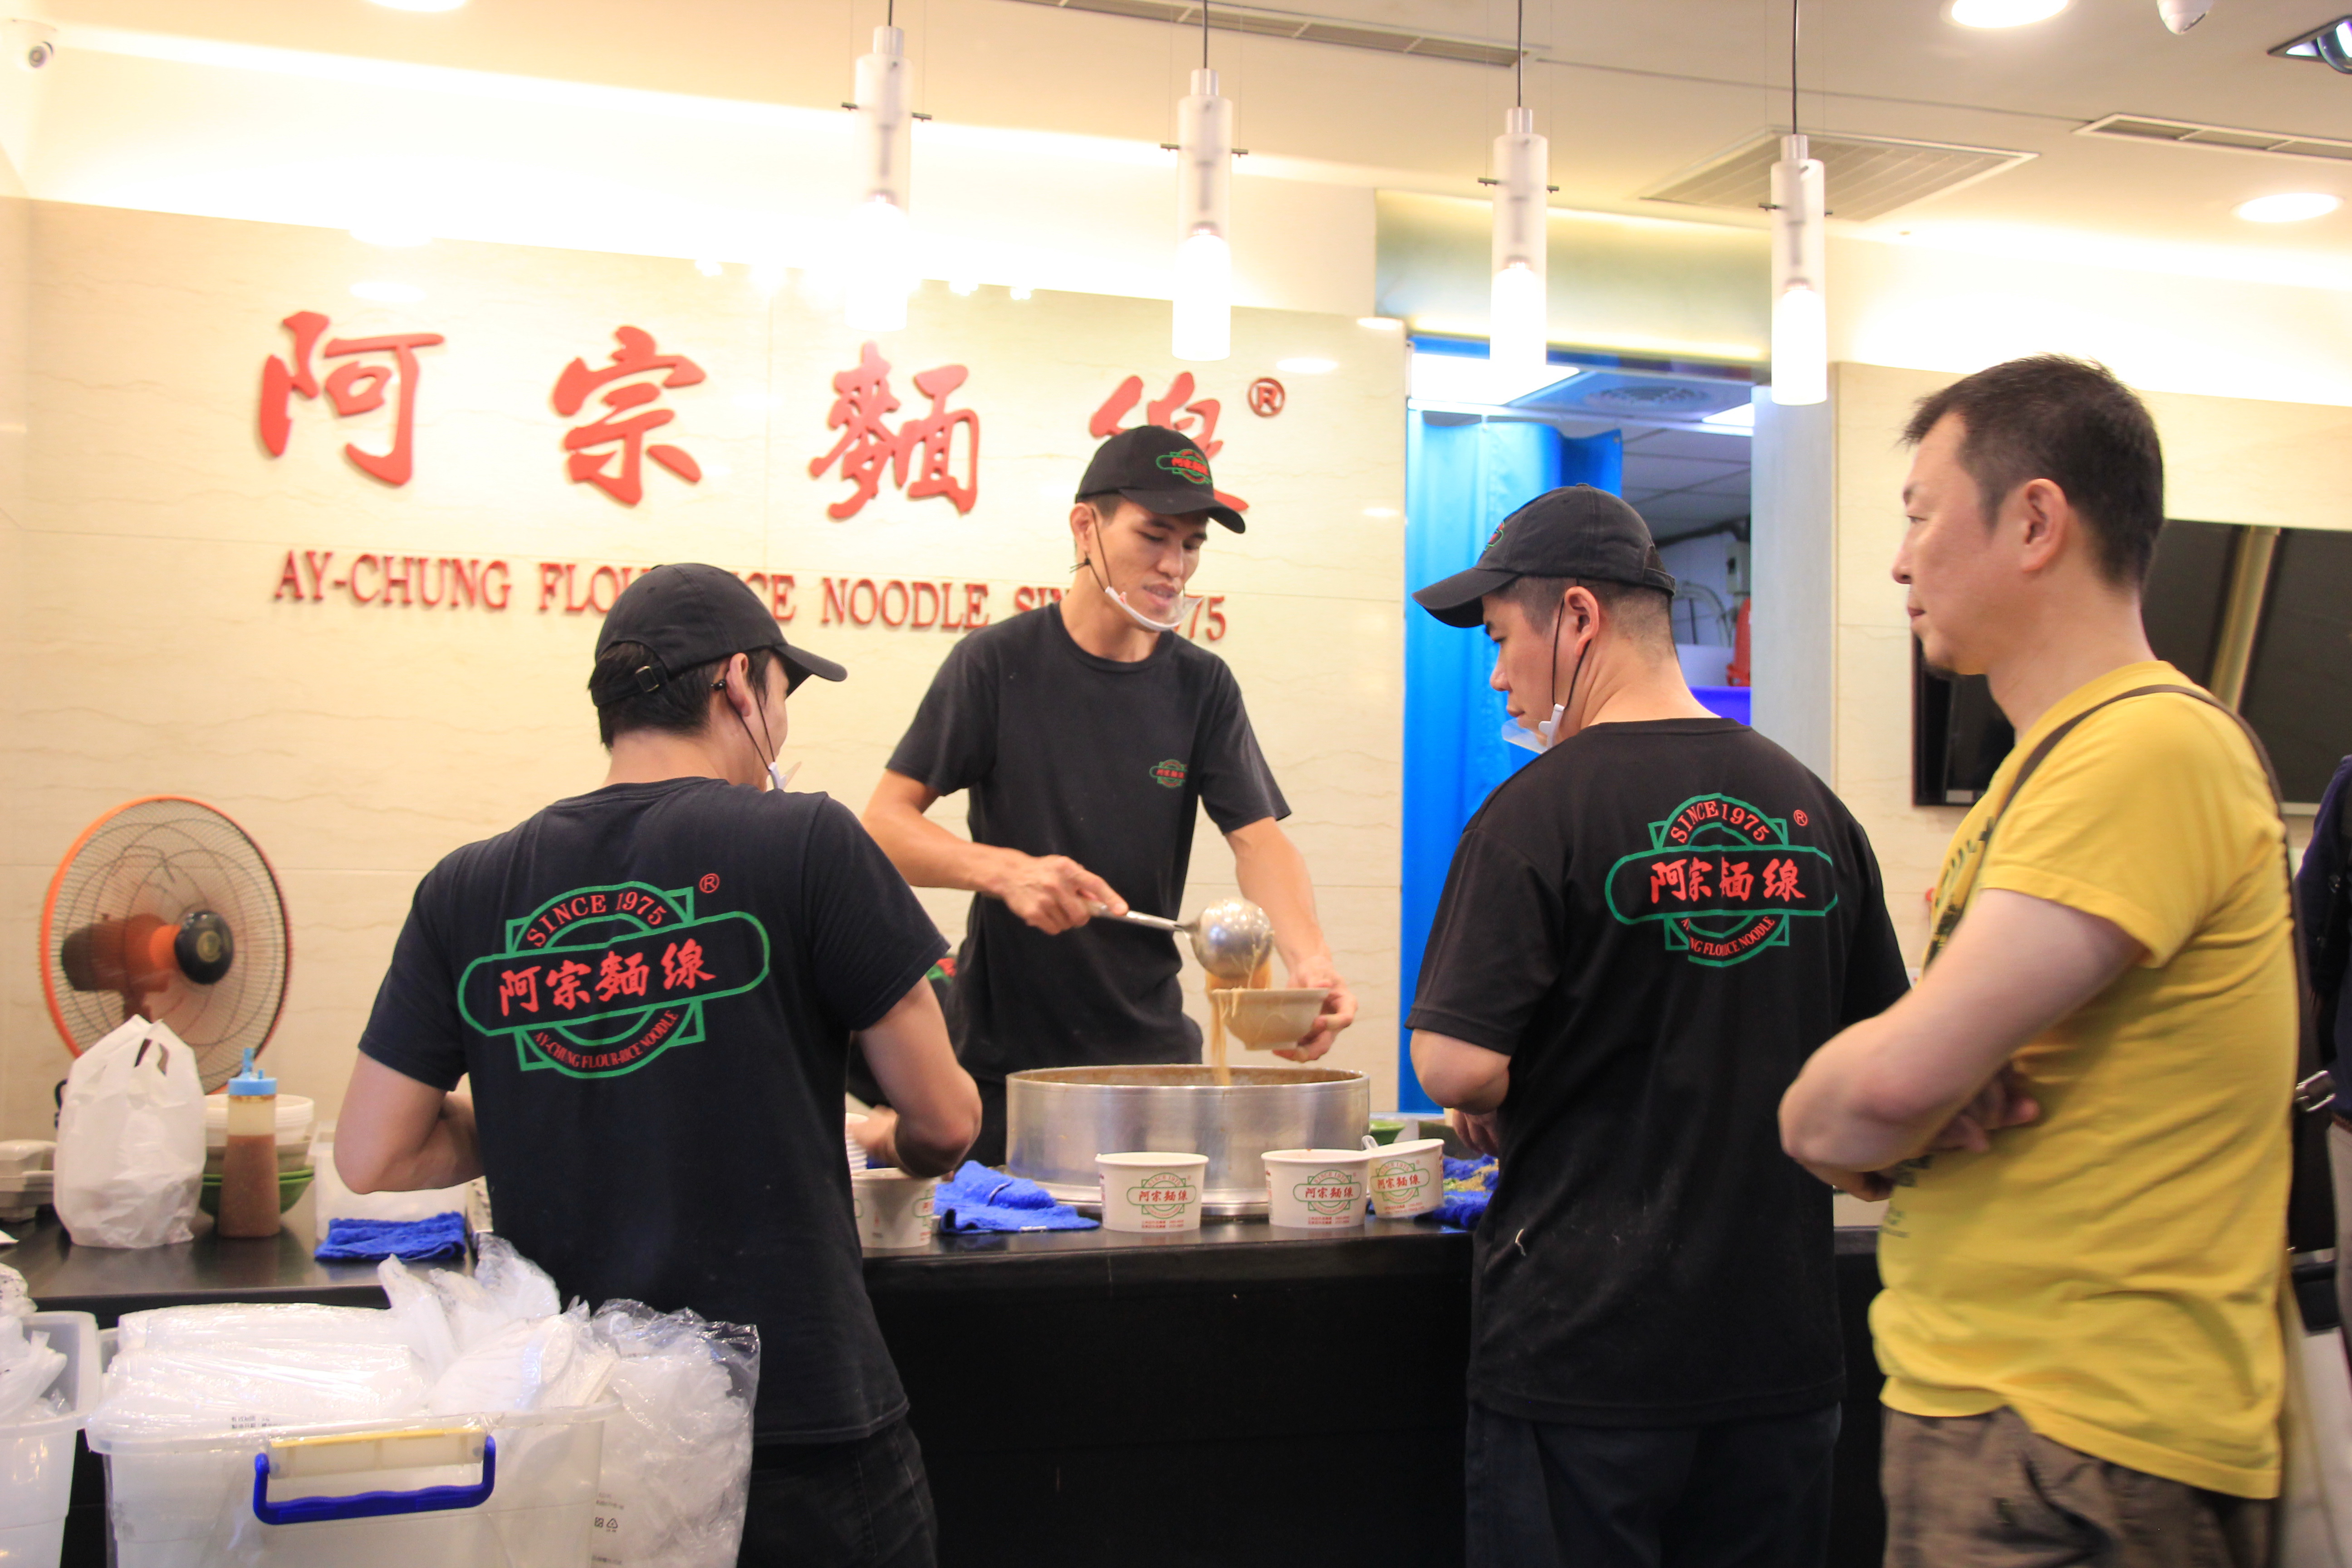 Staff is always busy serving the noodle - Photo: Dong Nguyen/ Tuoi Tre News